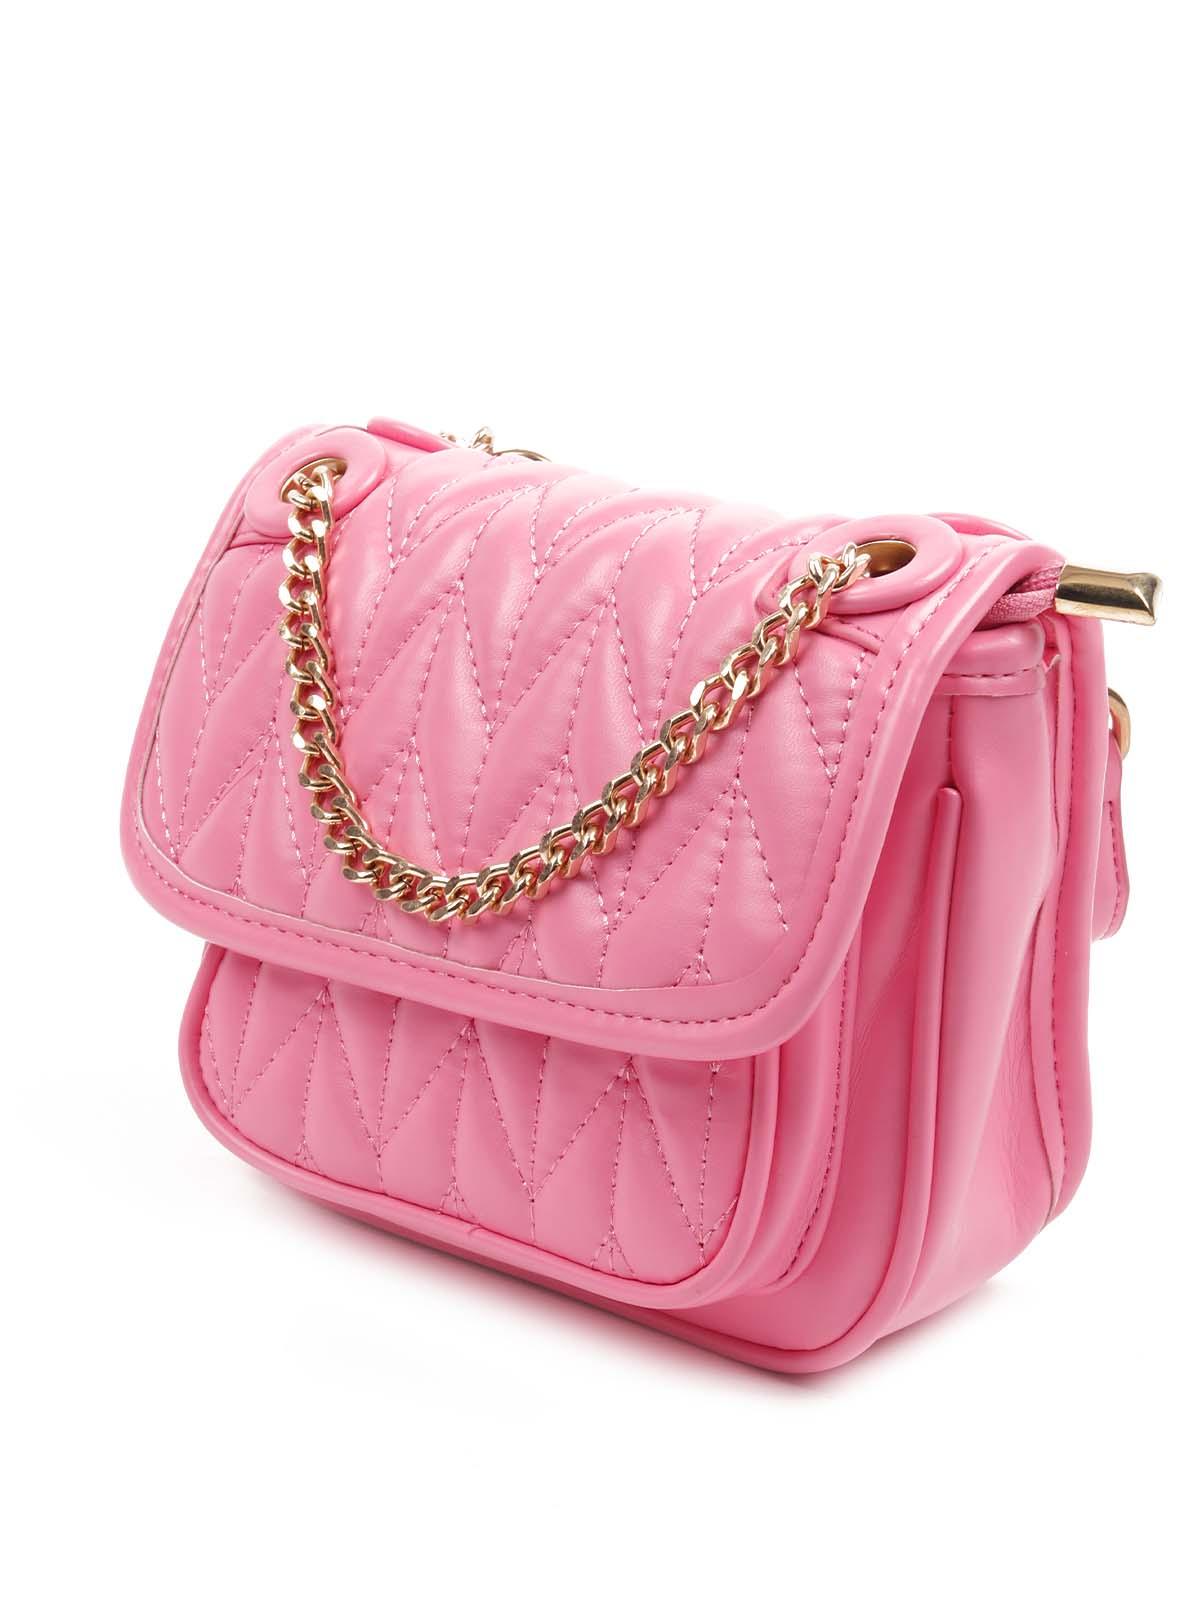 Pink Poodle Purse for Pet Lovers